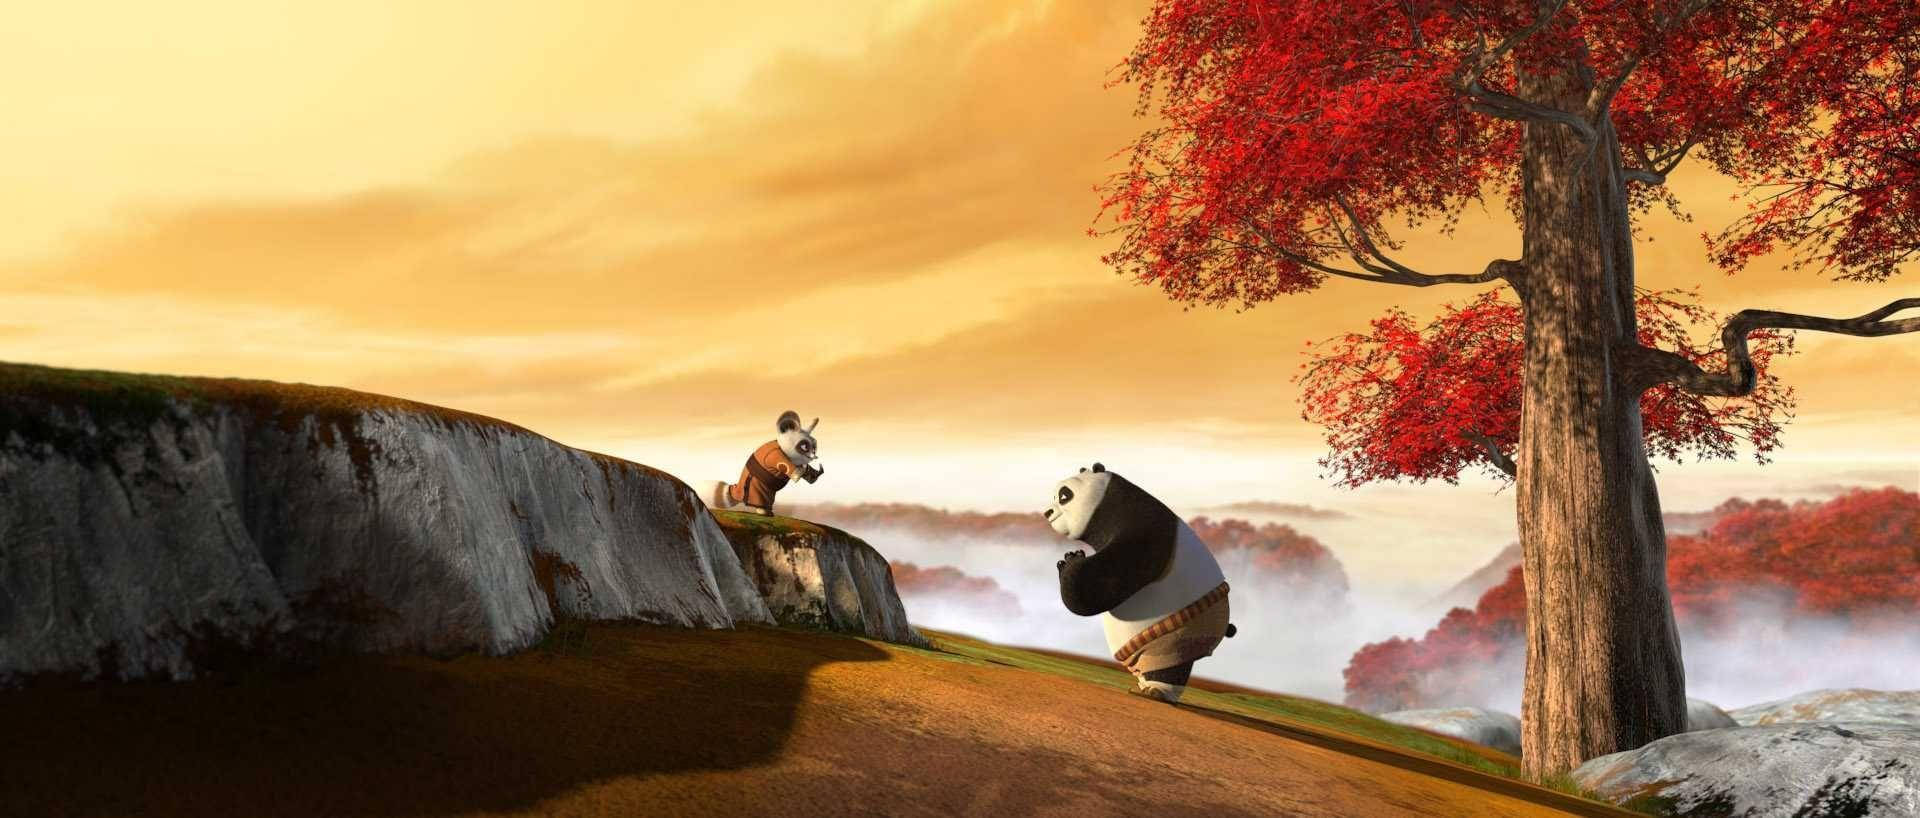 Caption: Shifu And Kung Fu Panda In A Moment Of Respect